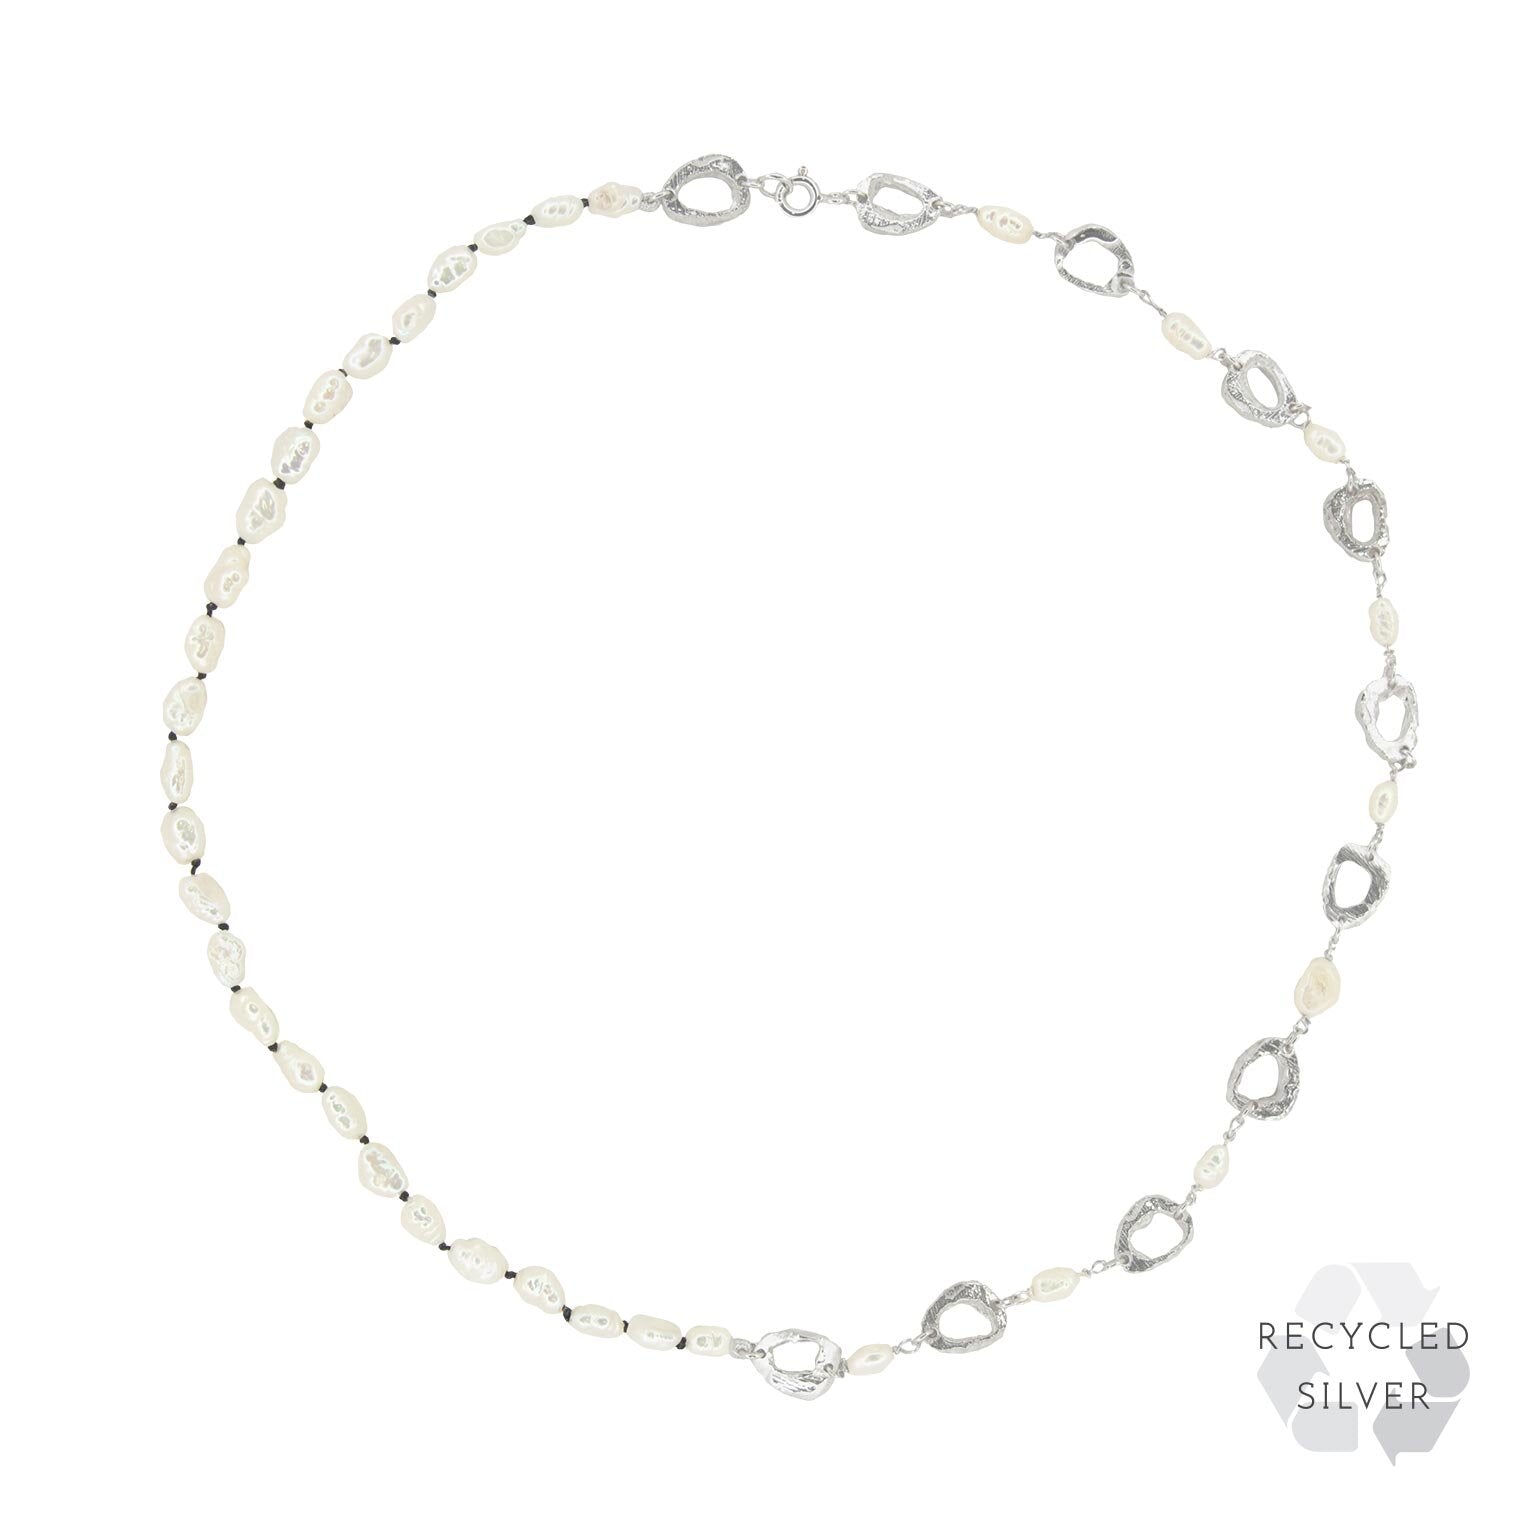 Leucia Recycled Silver Necklace